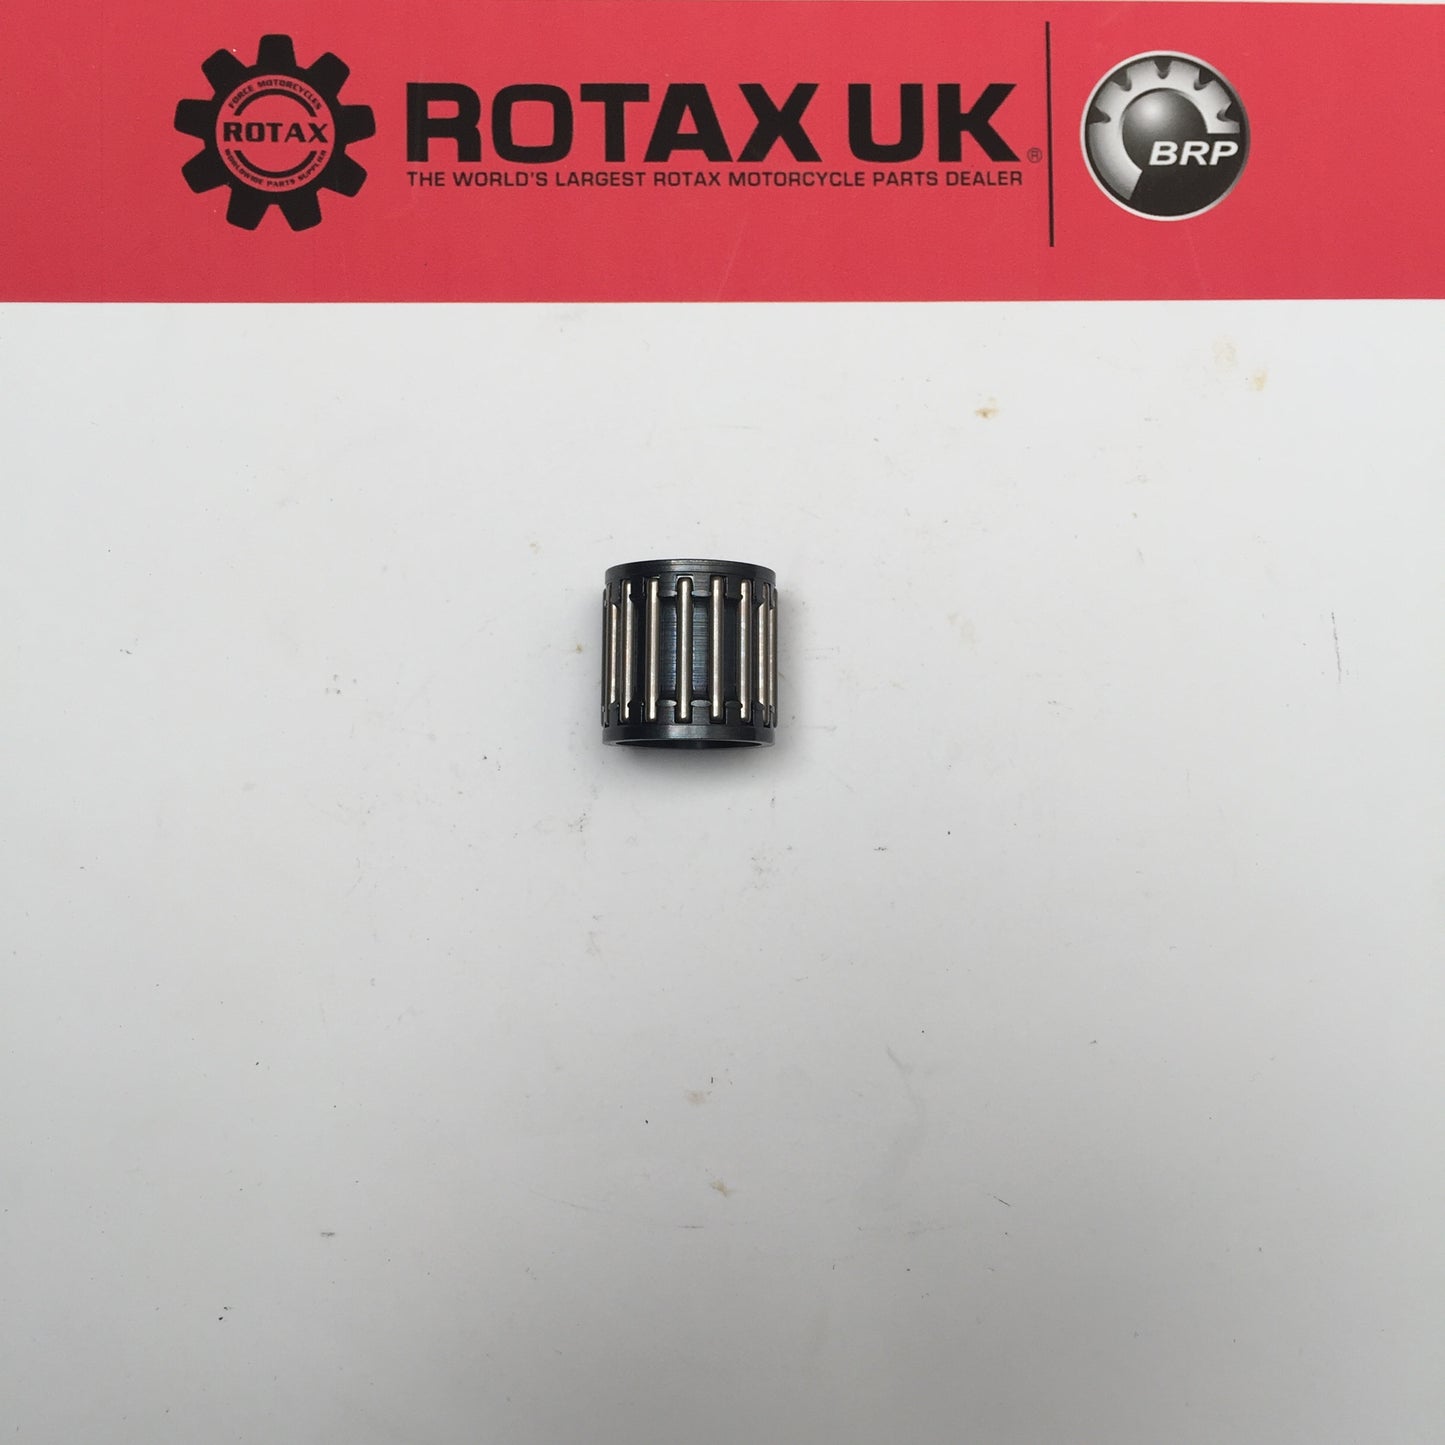 932905 - Bearing - Small End 18/22/22mm (was 932904) for many different engine types.